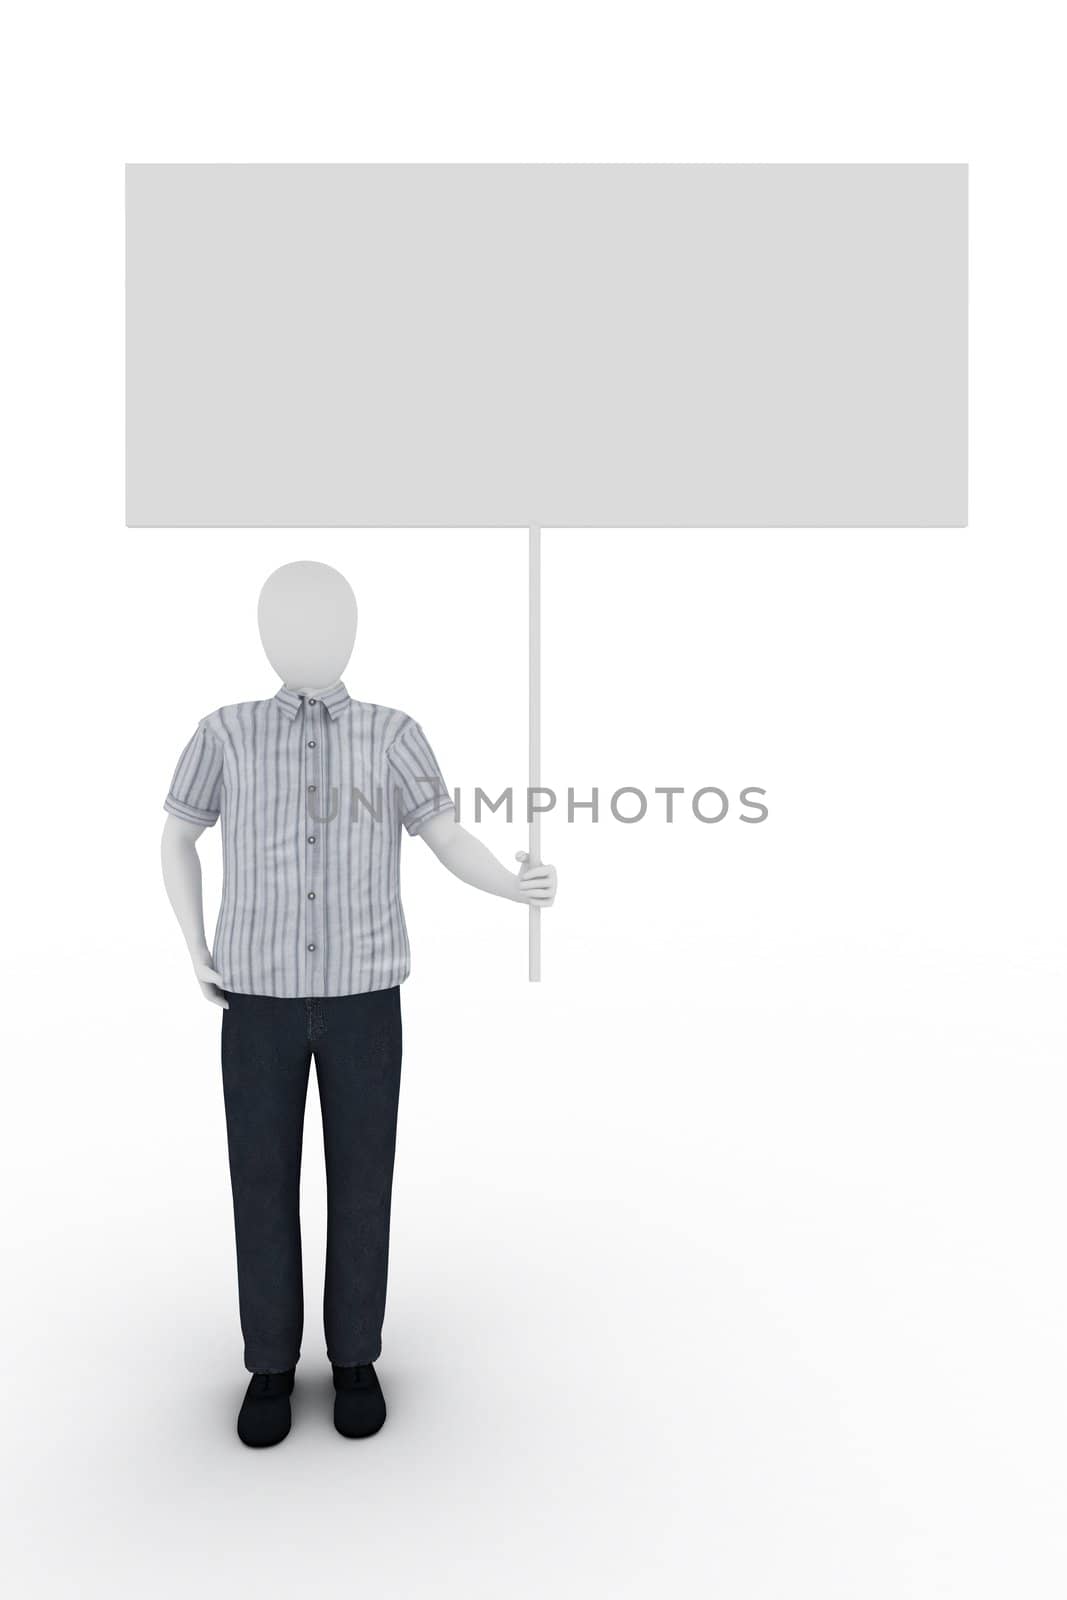 Human holds a billboard on white background by richwolf